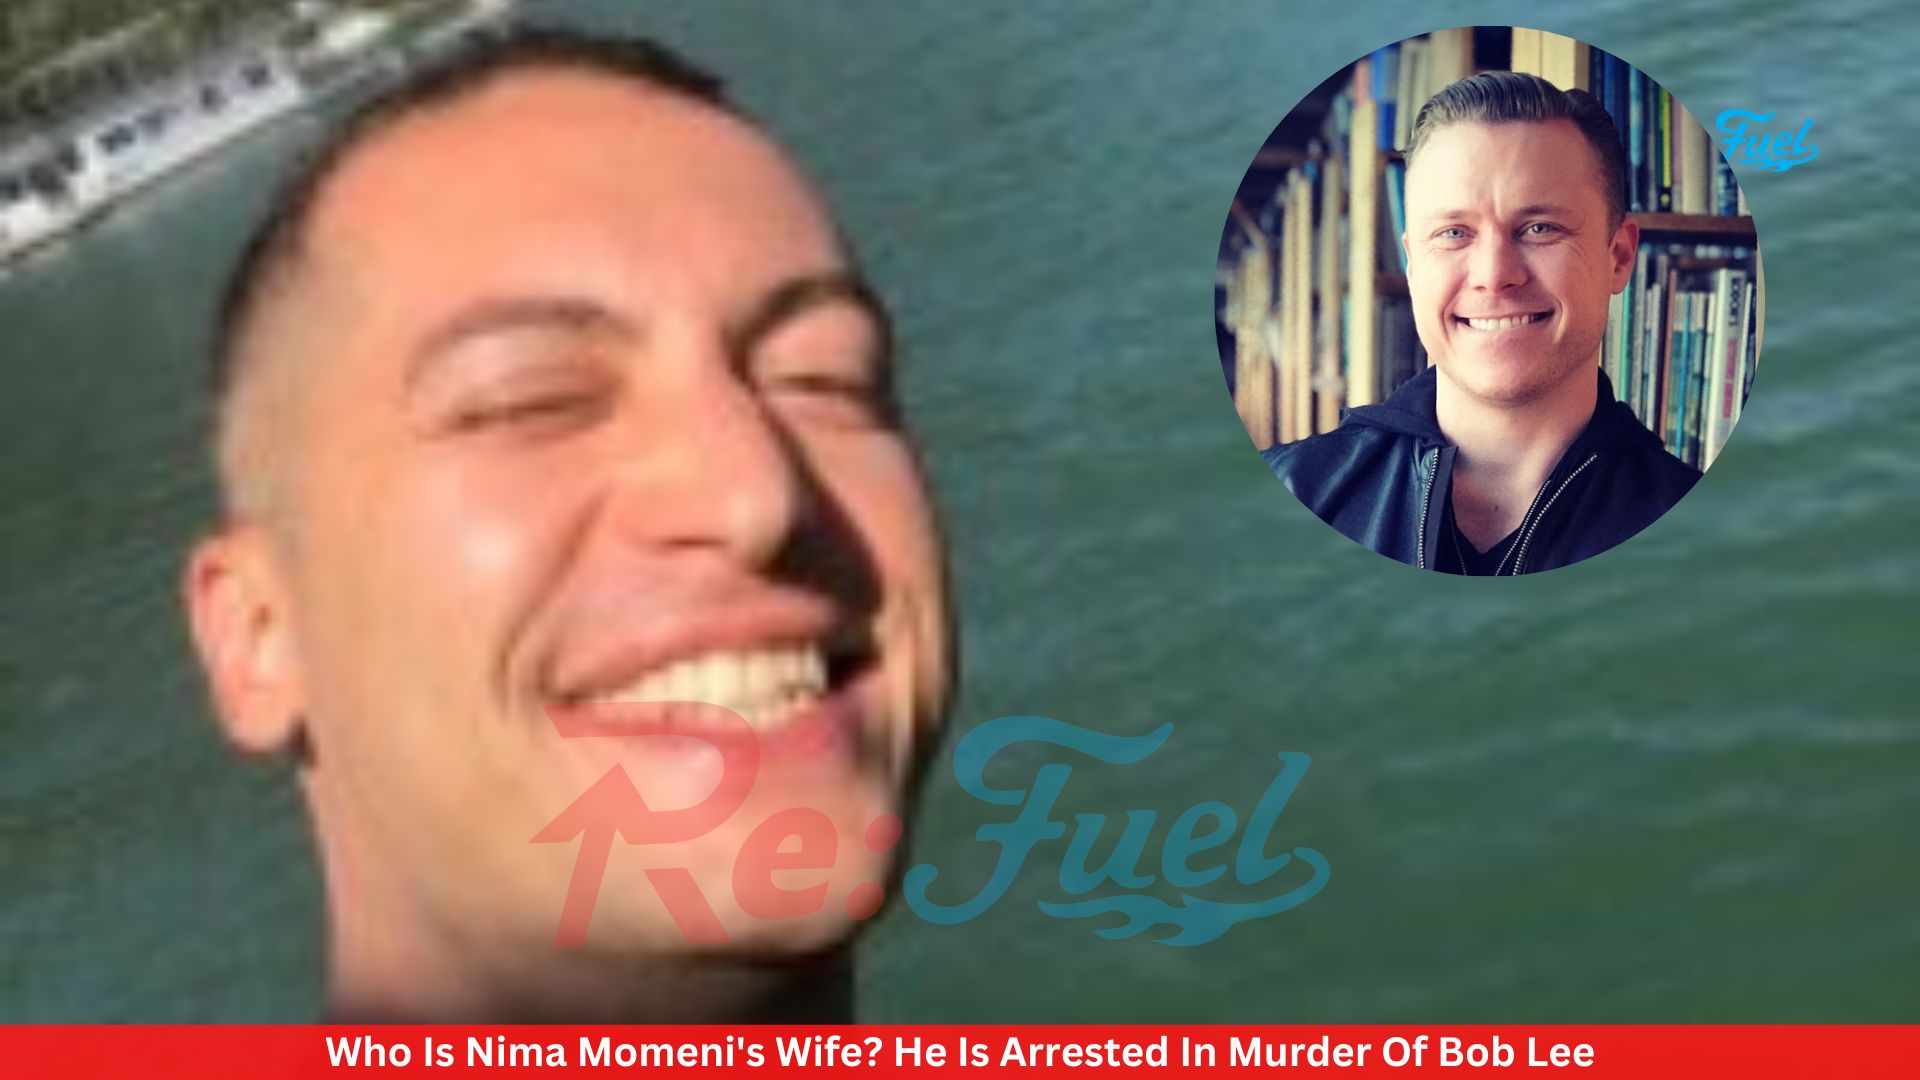 Who Is Nima Momeni's Wife? He Is Arrested In Murder Of Bob Lee